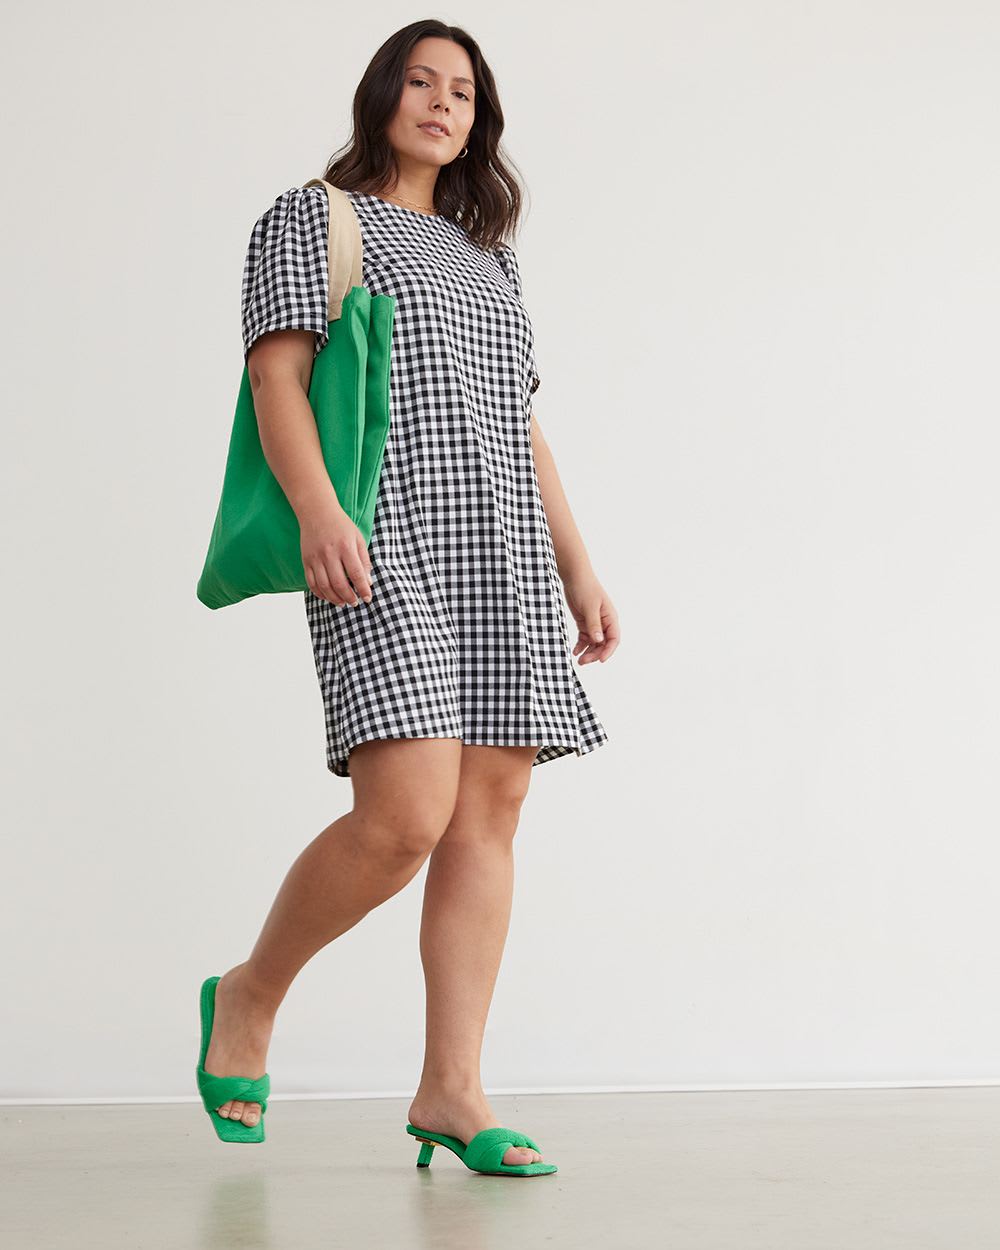 Short-Puffy-Sleeve Dress with Bow at Neckline